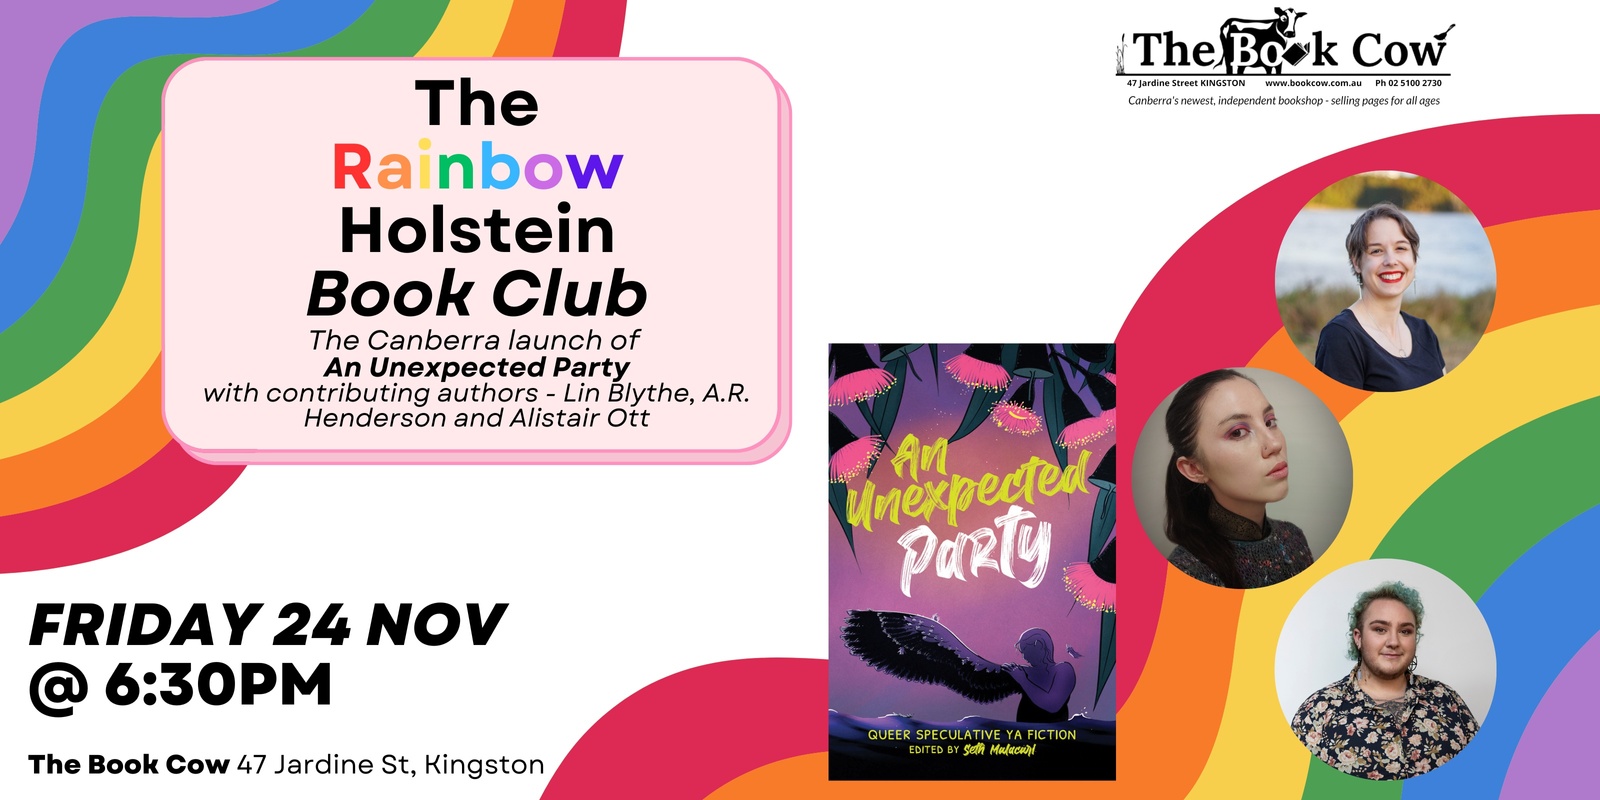 Banner image for The Rainbow Holstein Book Club - An Unexpected Party Book Launch